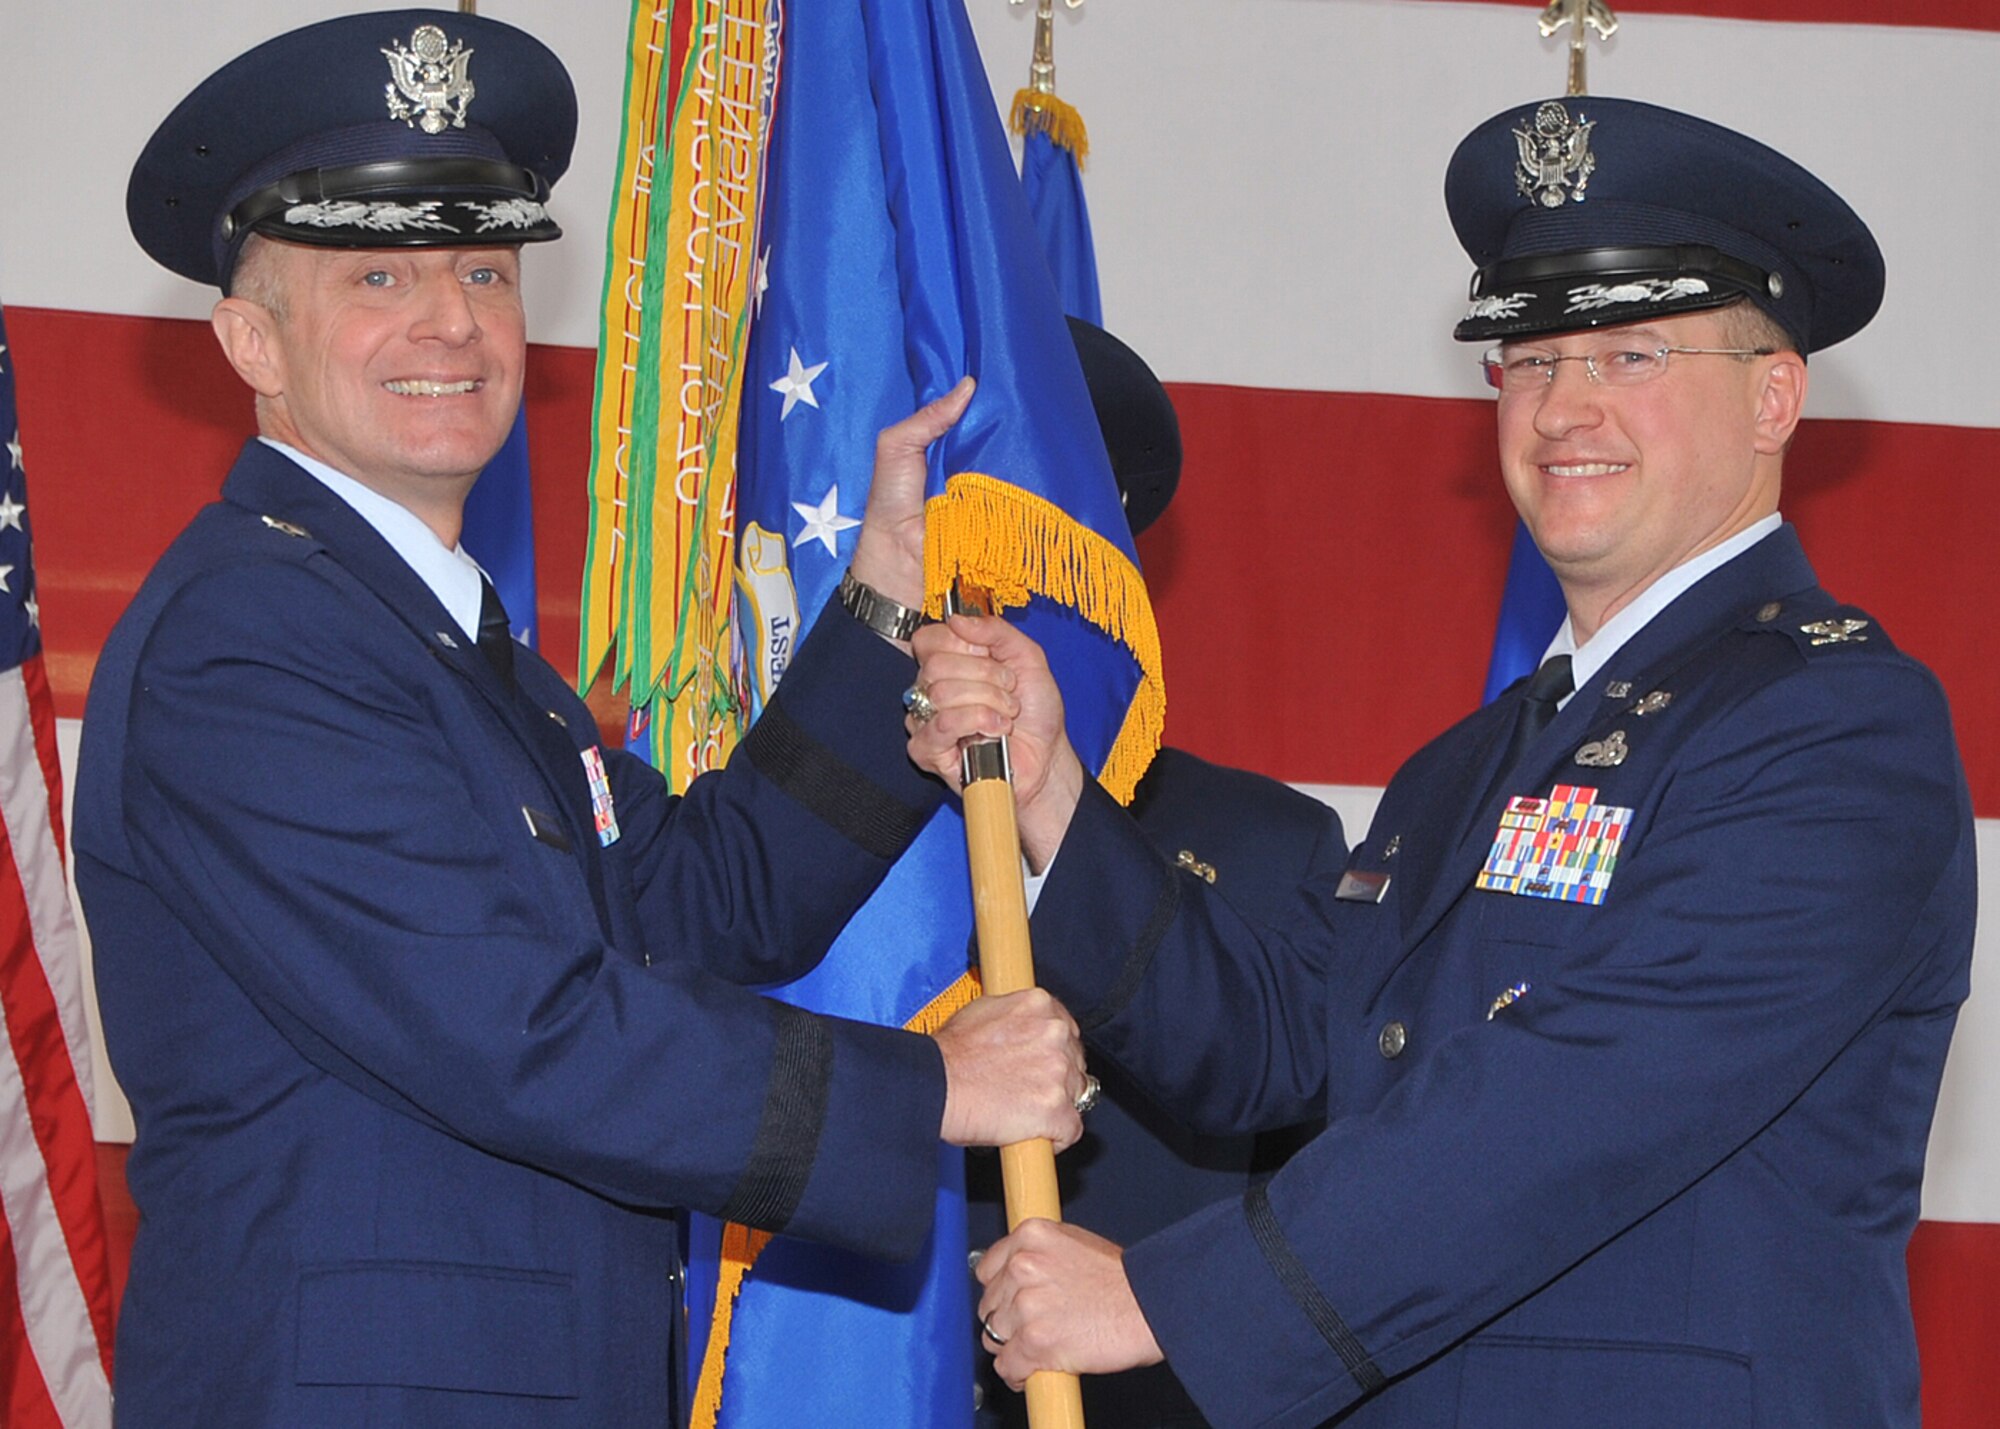 During an assumption of command ceremony Dec. 19, Brig. Gen. Garrett Harencak, Air Force Nuclear Weapons Center commander, left, passes the guidon to Col. John C. Kubinec, the new 377th Air Base Wing commander. U.S. Air Force Photo by Todd Berenger